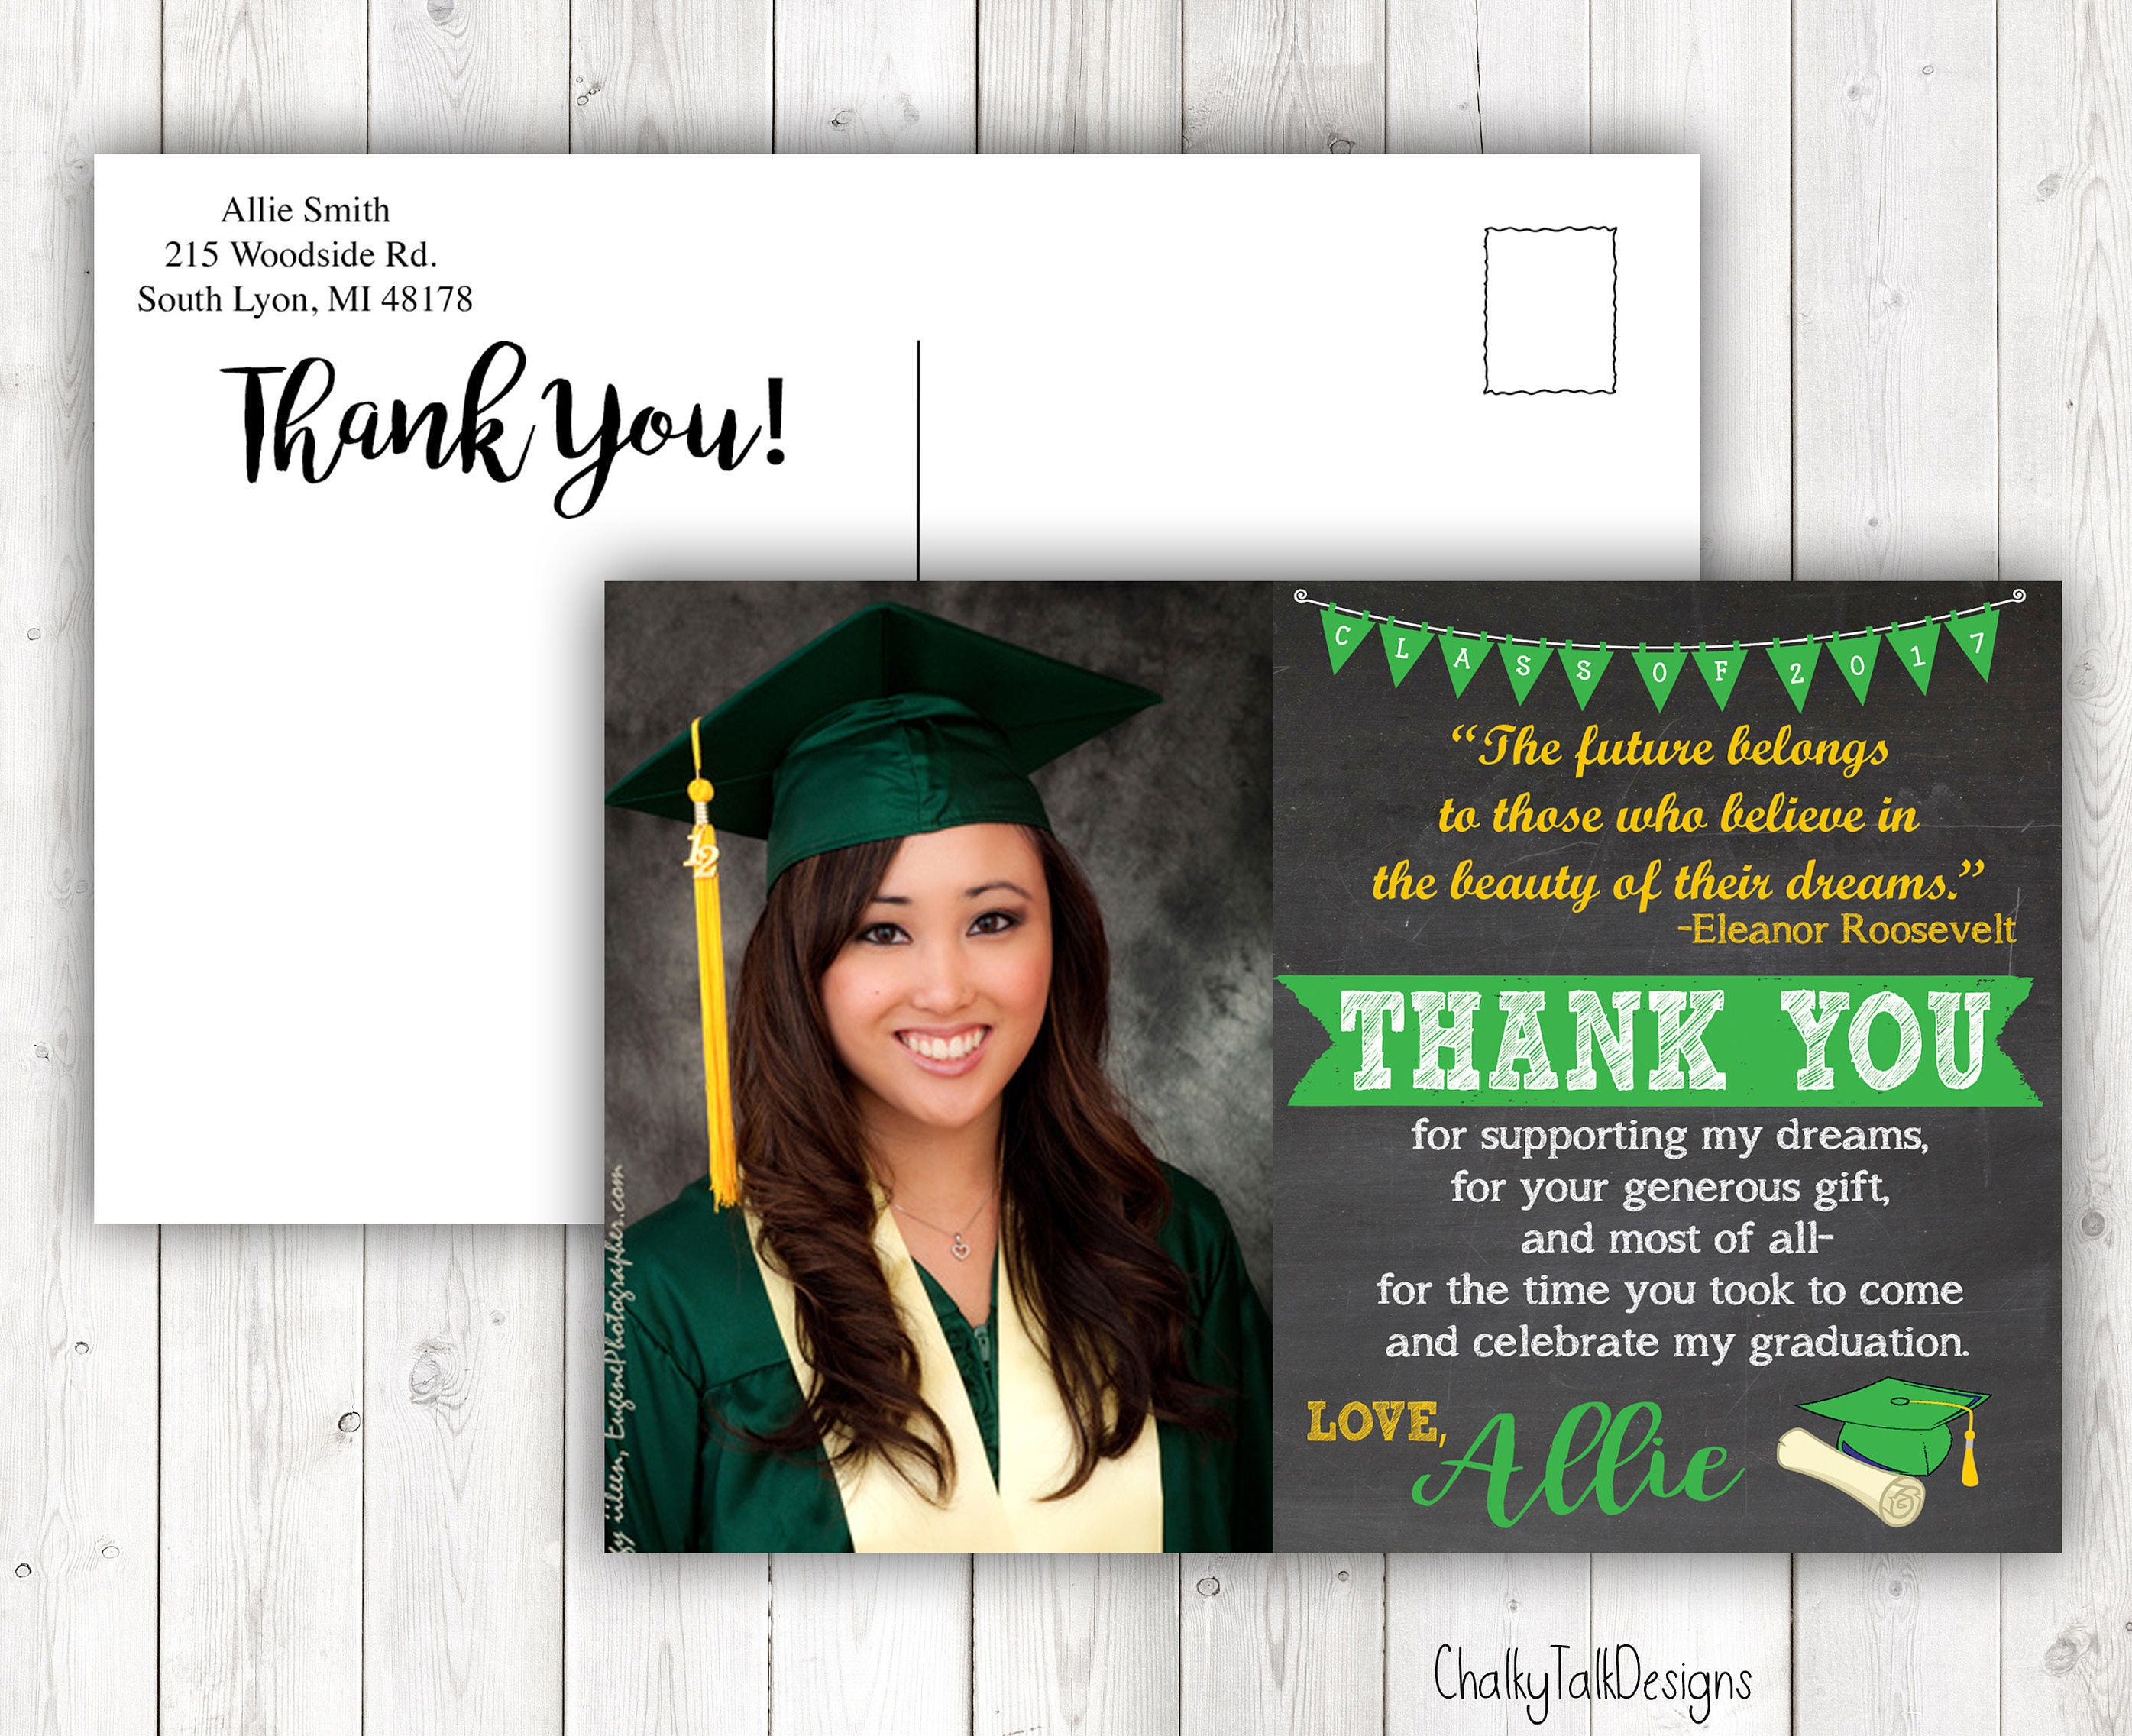 Graduation Thank You Cards Can be any colors mascot etc. Etsy